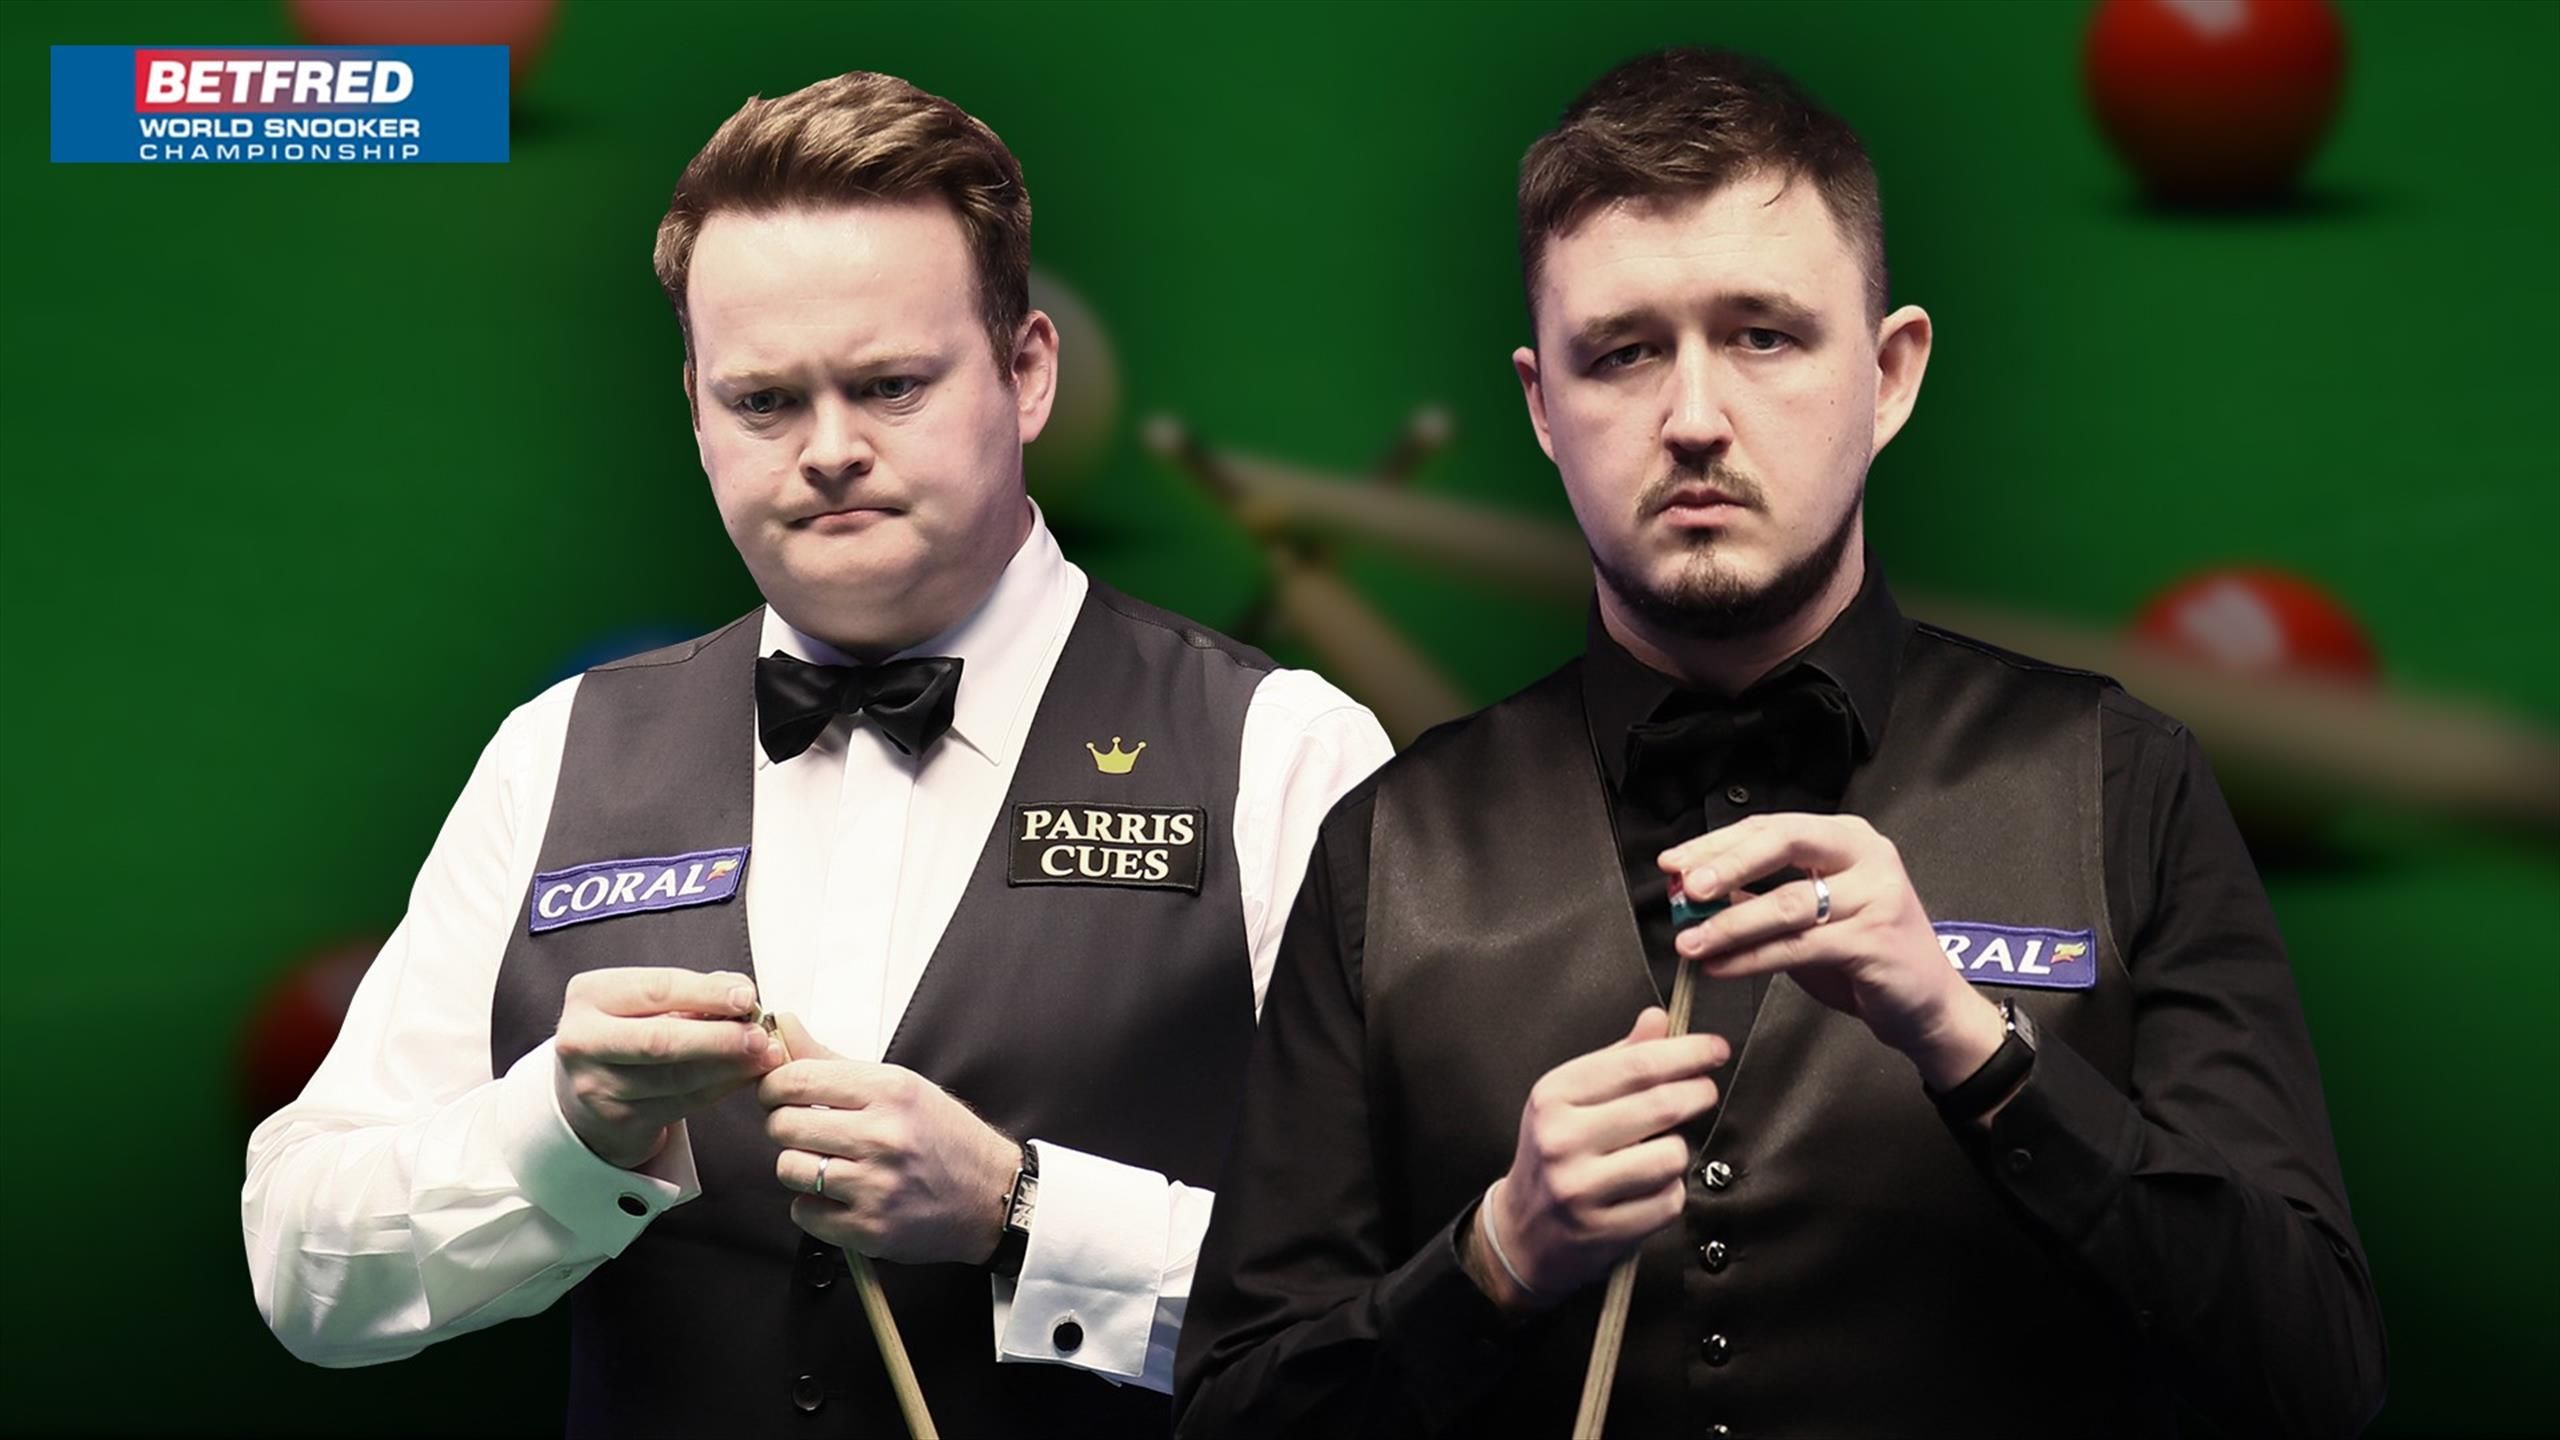 latest snooker scores in the world championship